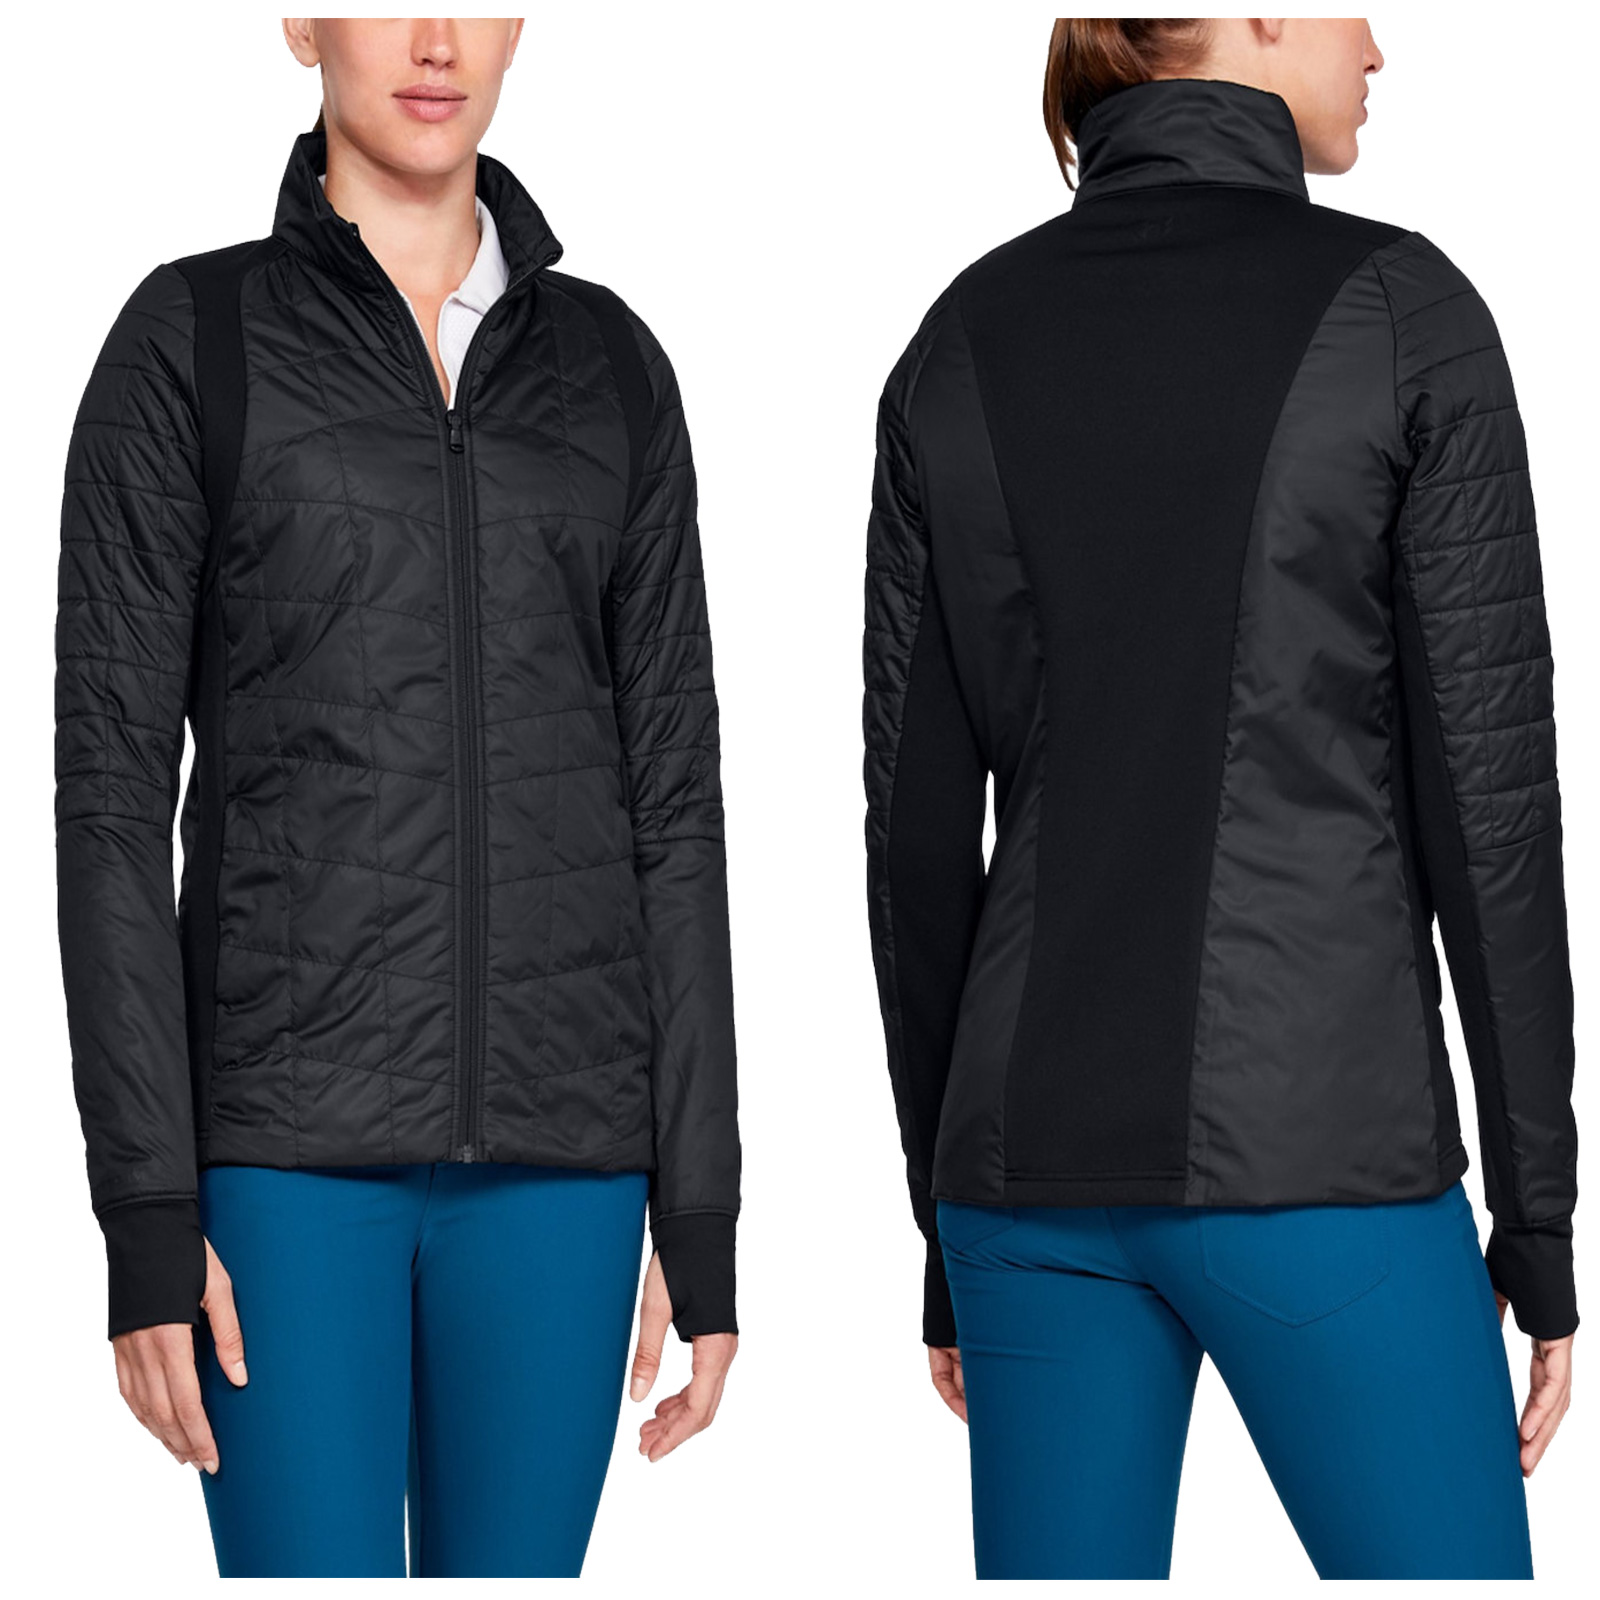 storm coldgear infrared insulated jacket